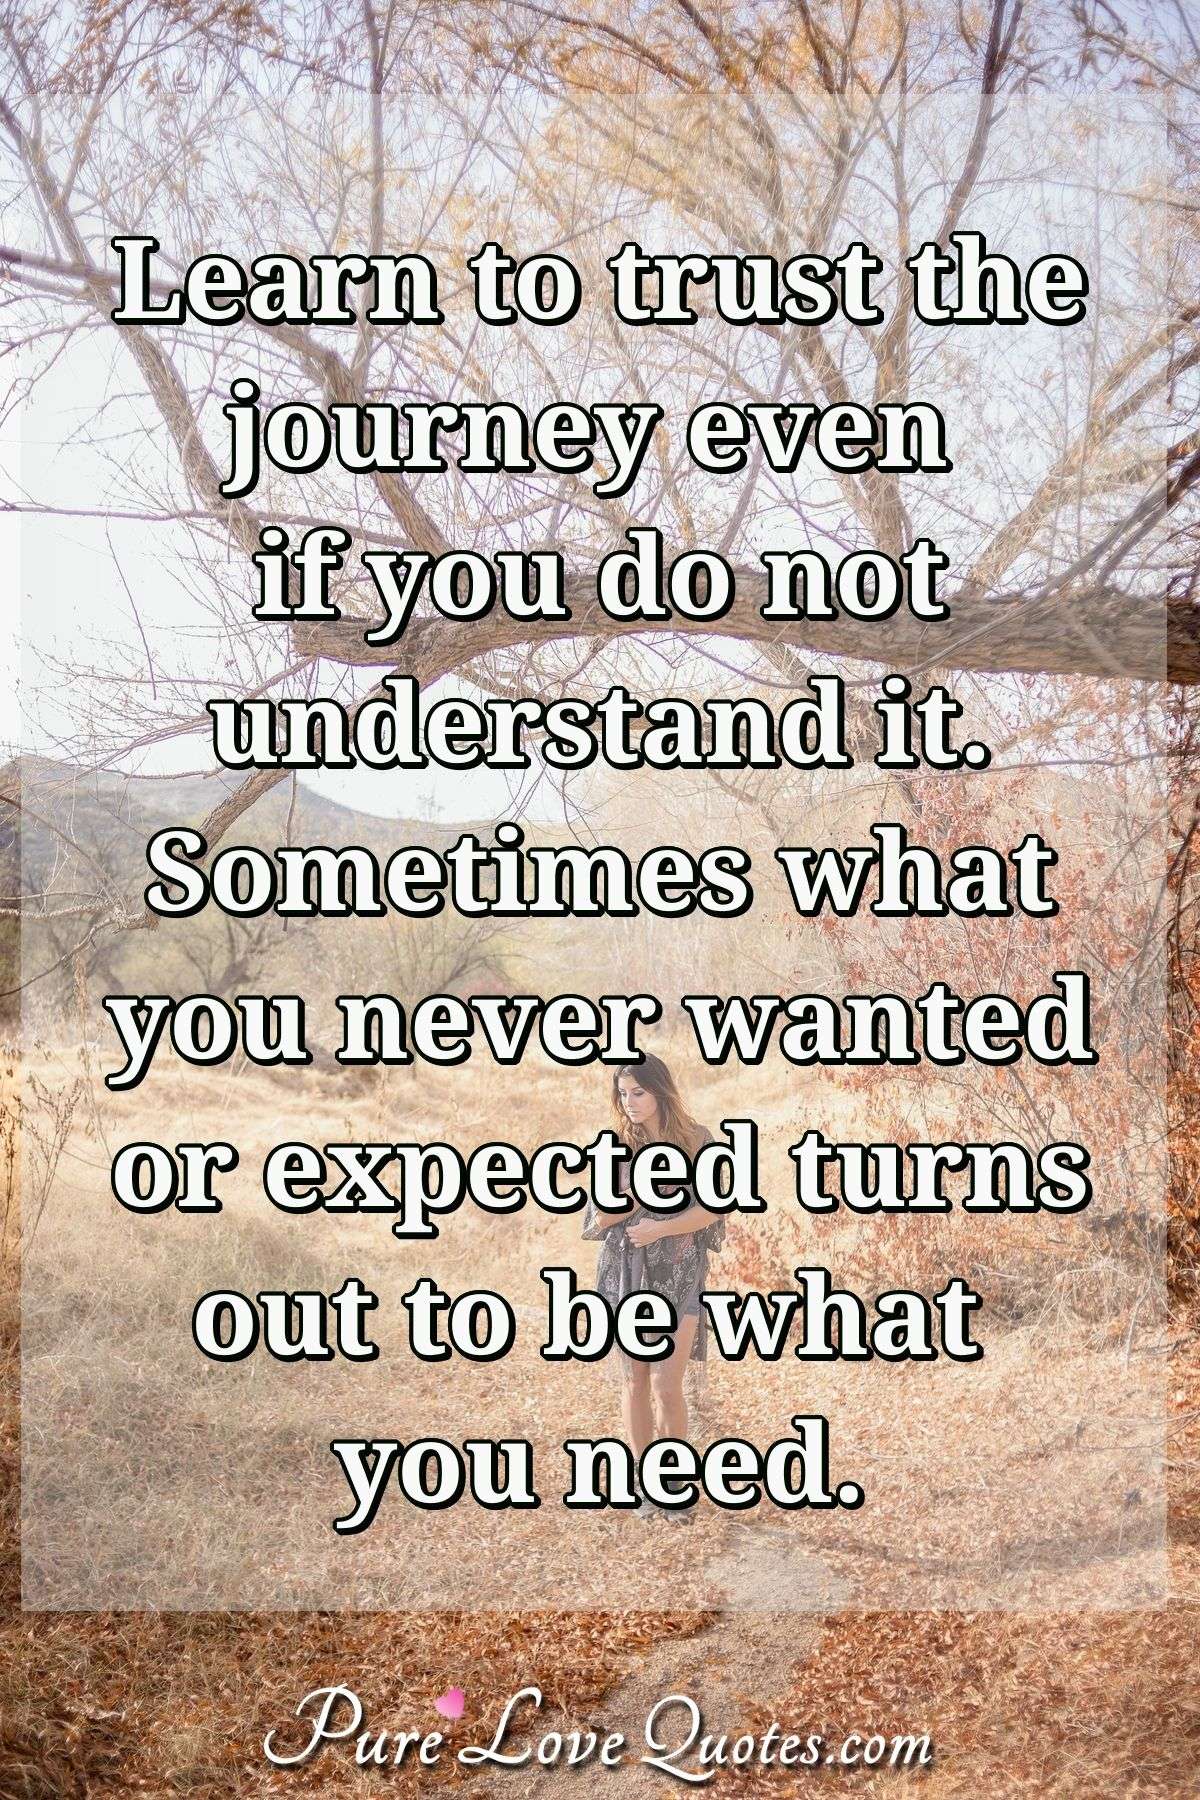 Learn to trust the journey even if you do not understand it. Sometimes what you never wanted or expected turns out to be what you need. - Anonymous